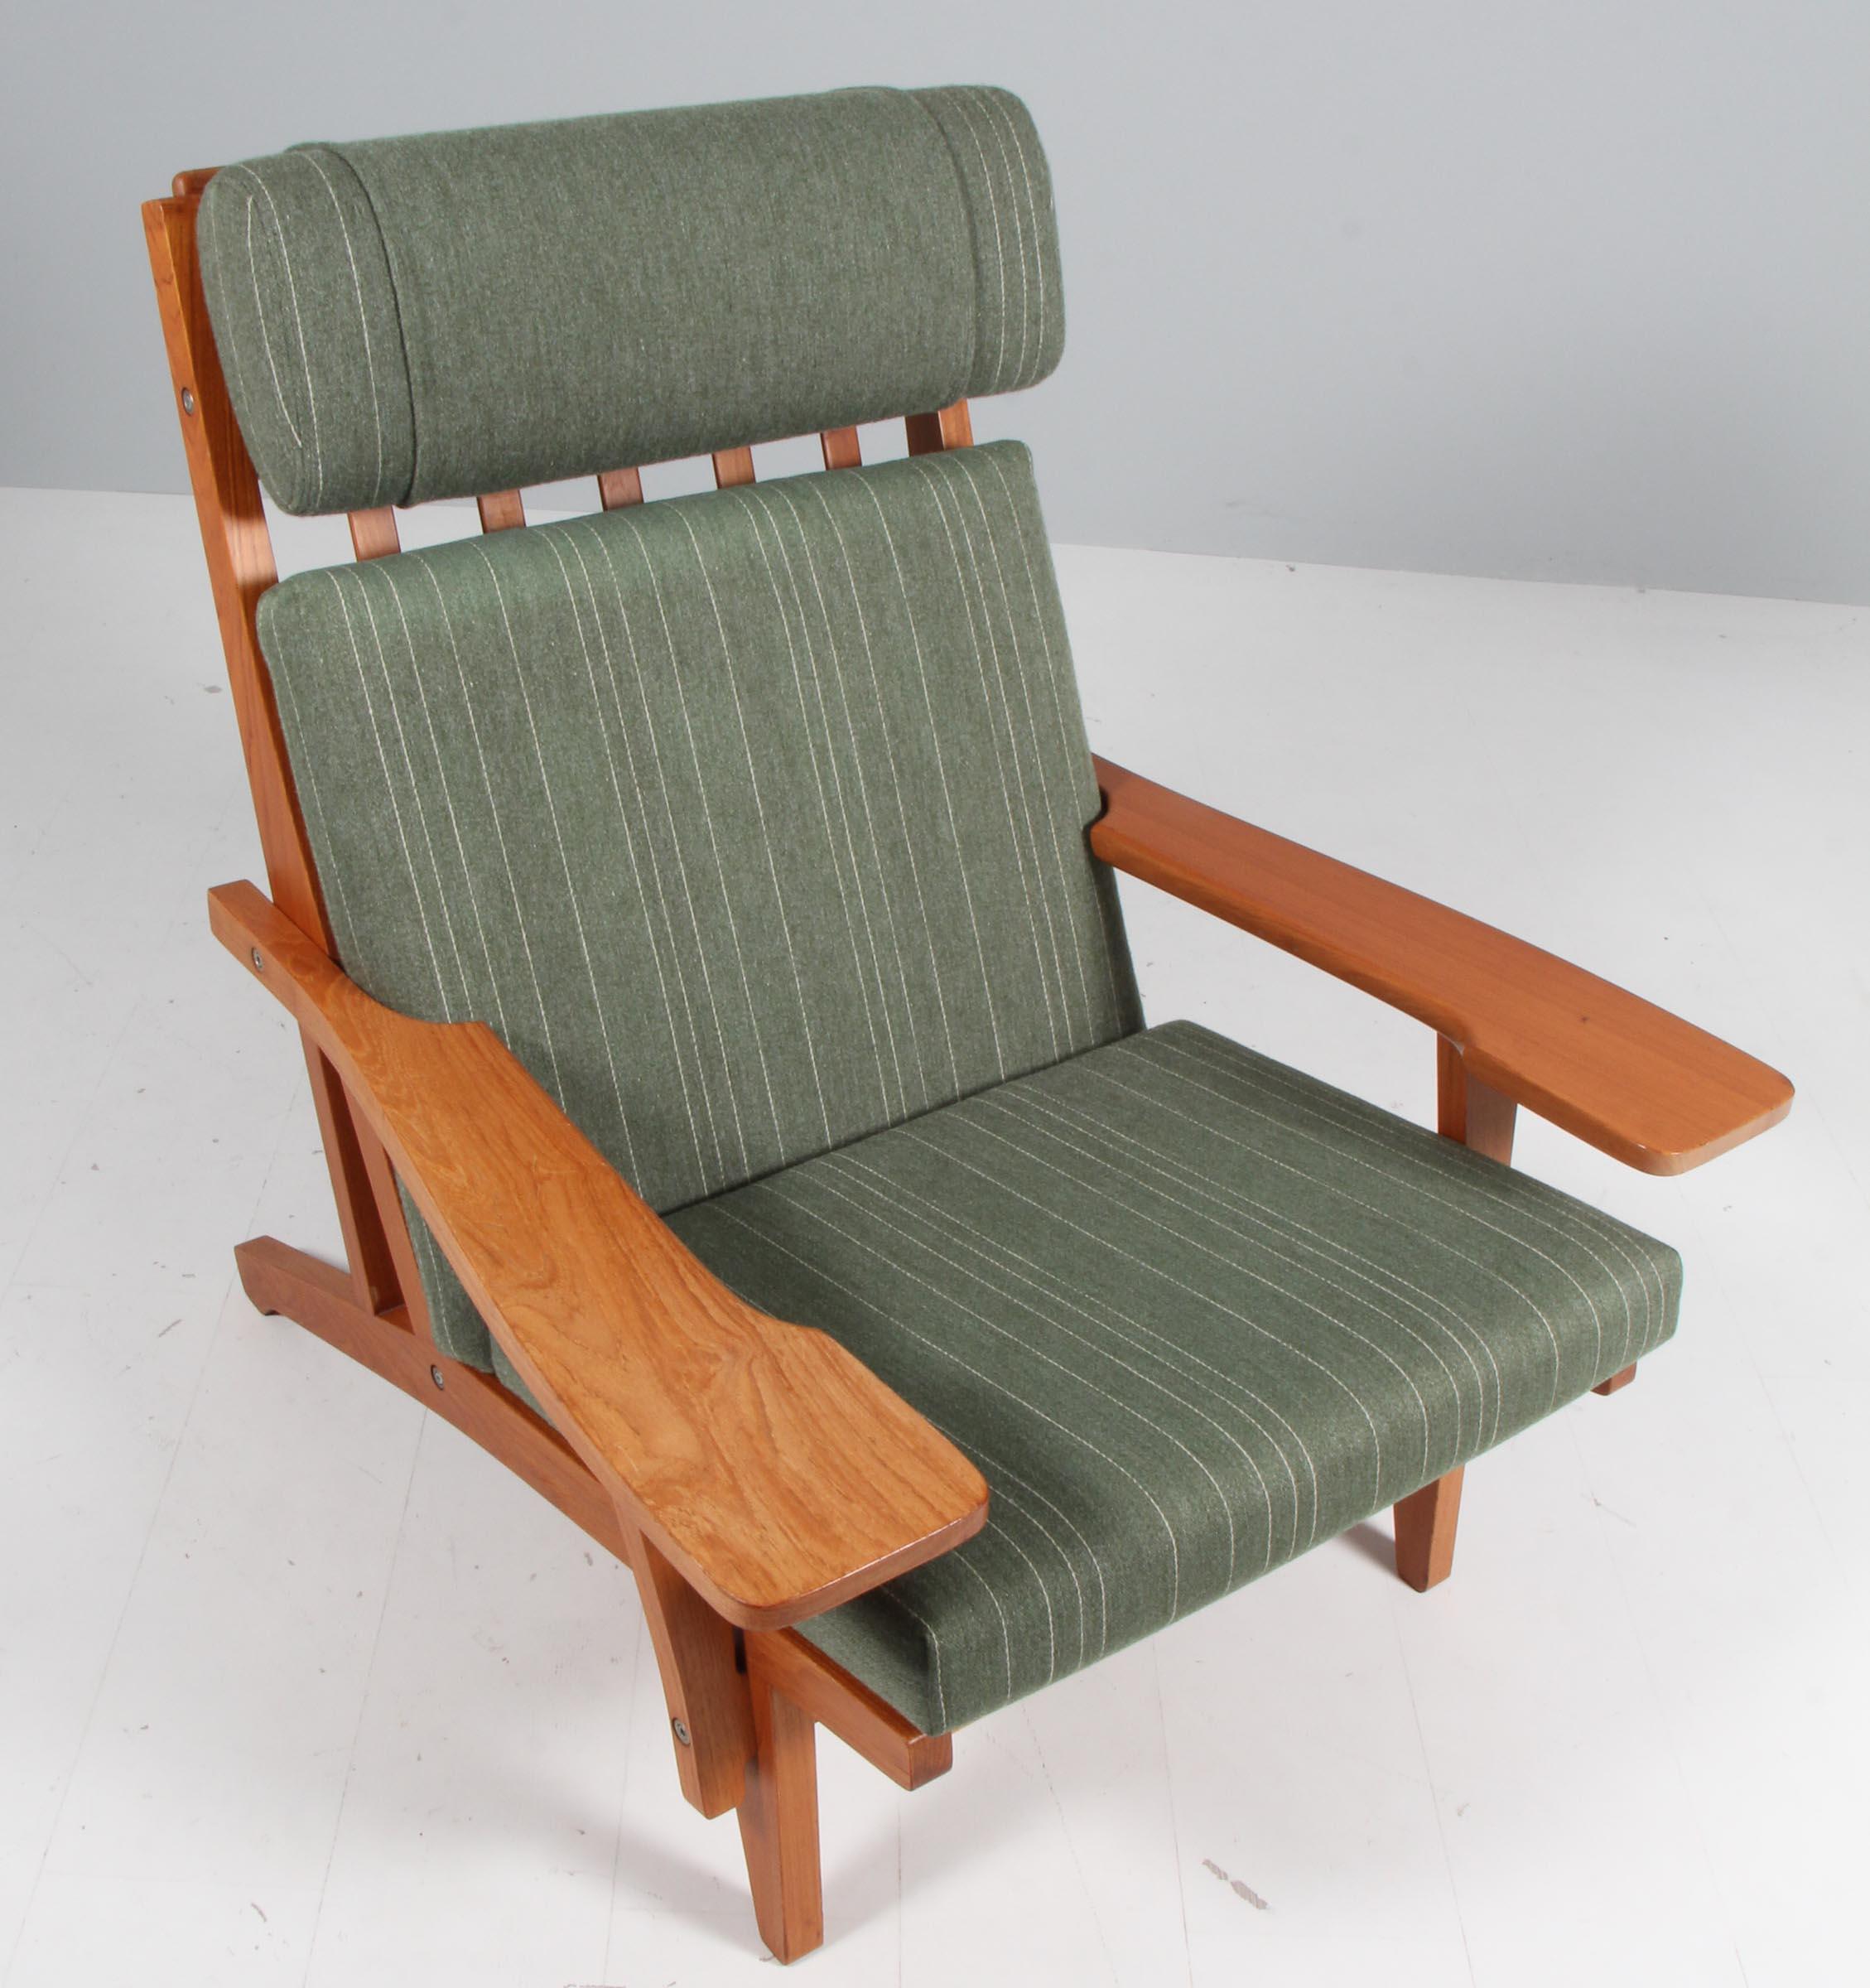 Hans J. Wegner lounge chair with loose cushions upholstered with green savan wool.

Frame of teak. With armrests.

Model GE-375, made by GETAMA.